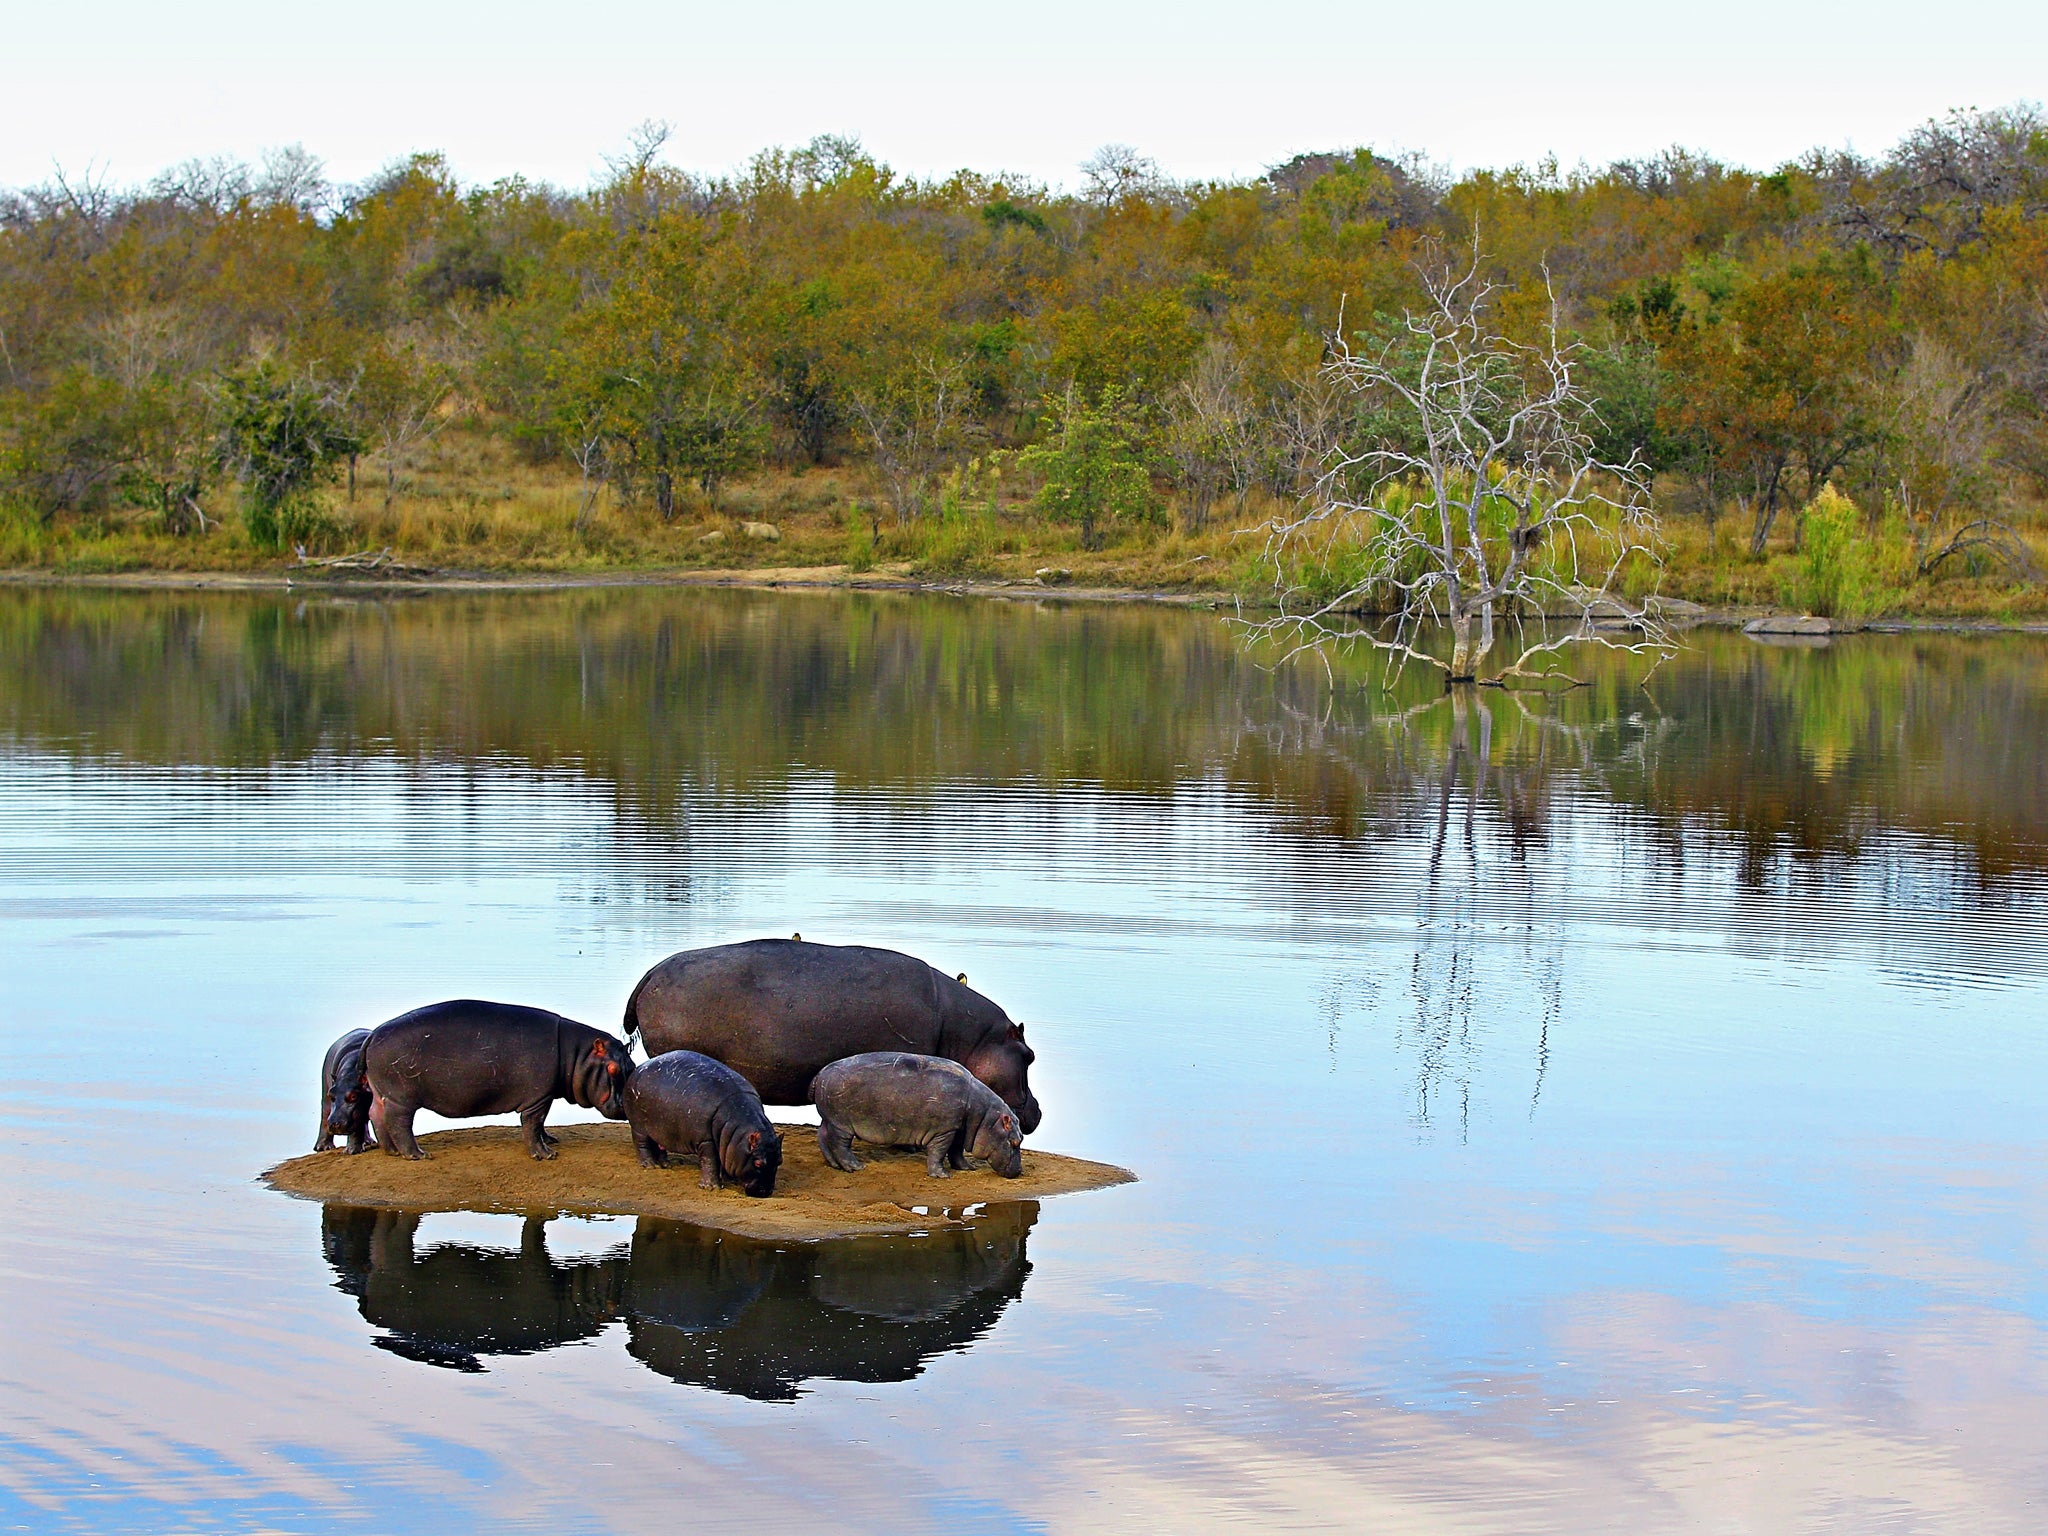 Island life: a pod of hippos in Kruger, South Africa